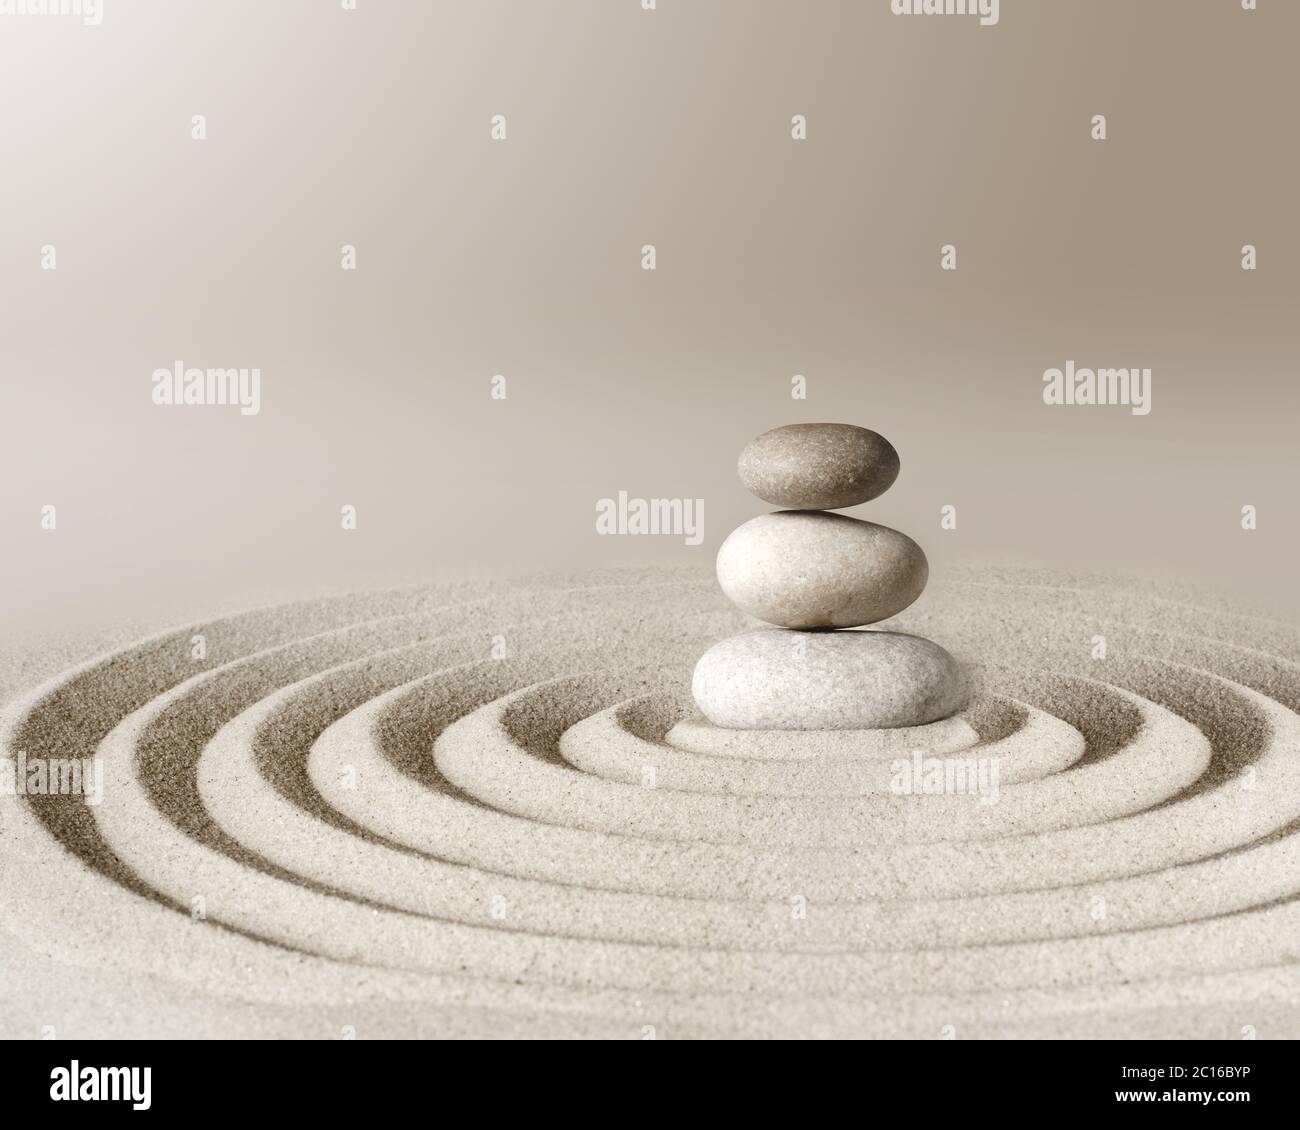 Japanese zen garden meditation stone, concentration and relaxation sand and rock for harmony and balance Stock Photo